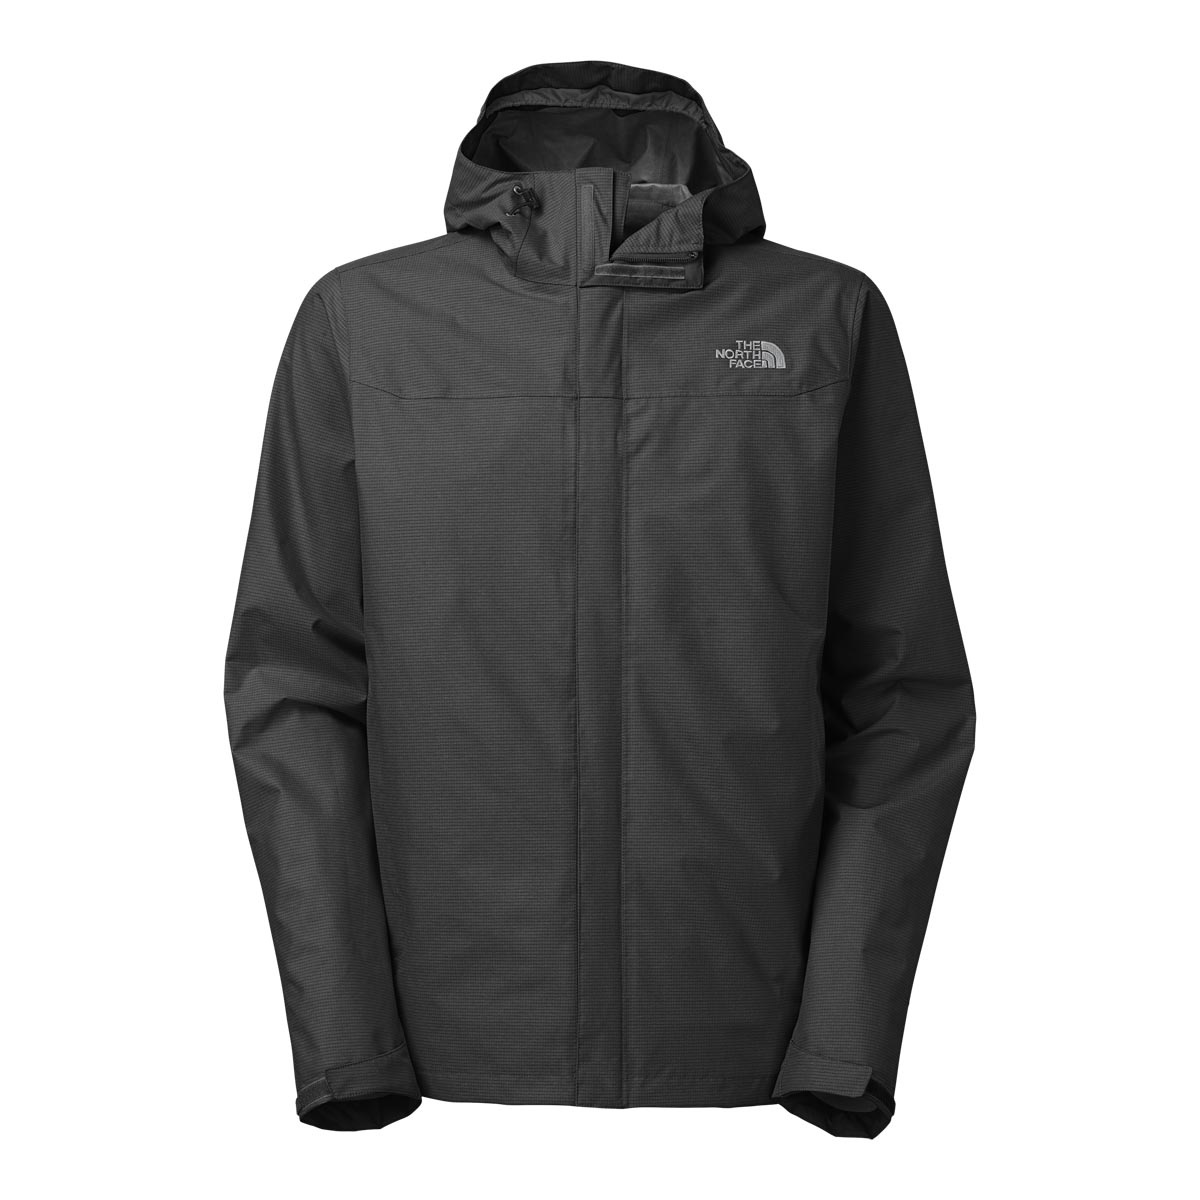 The North Face Men's Venture Jacket Tall Sizes